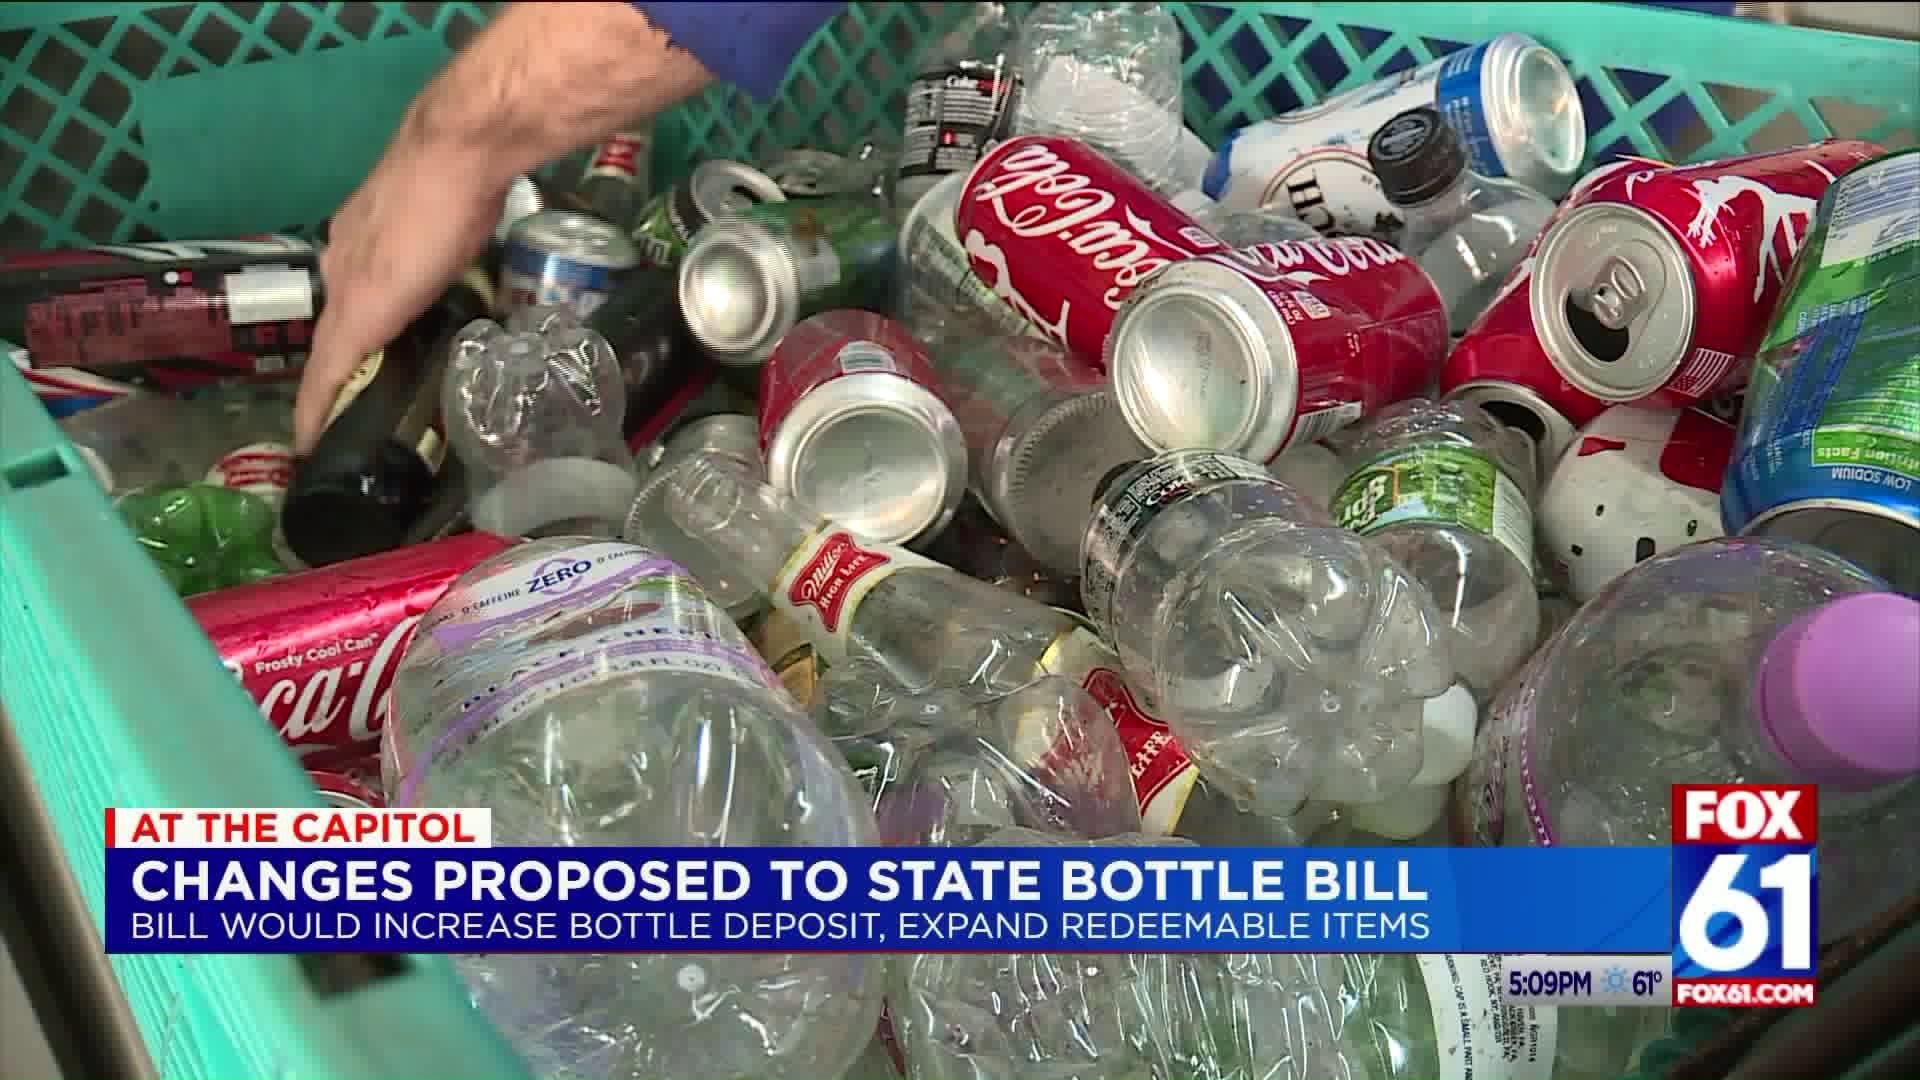 Change proposed to to state bottle bill